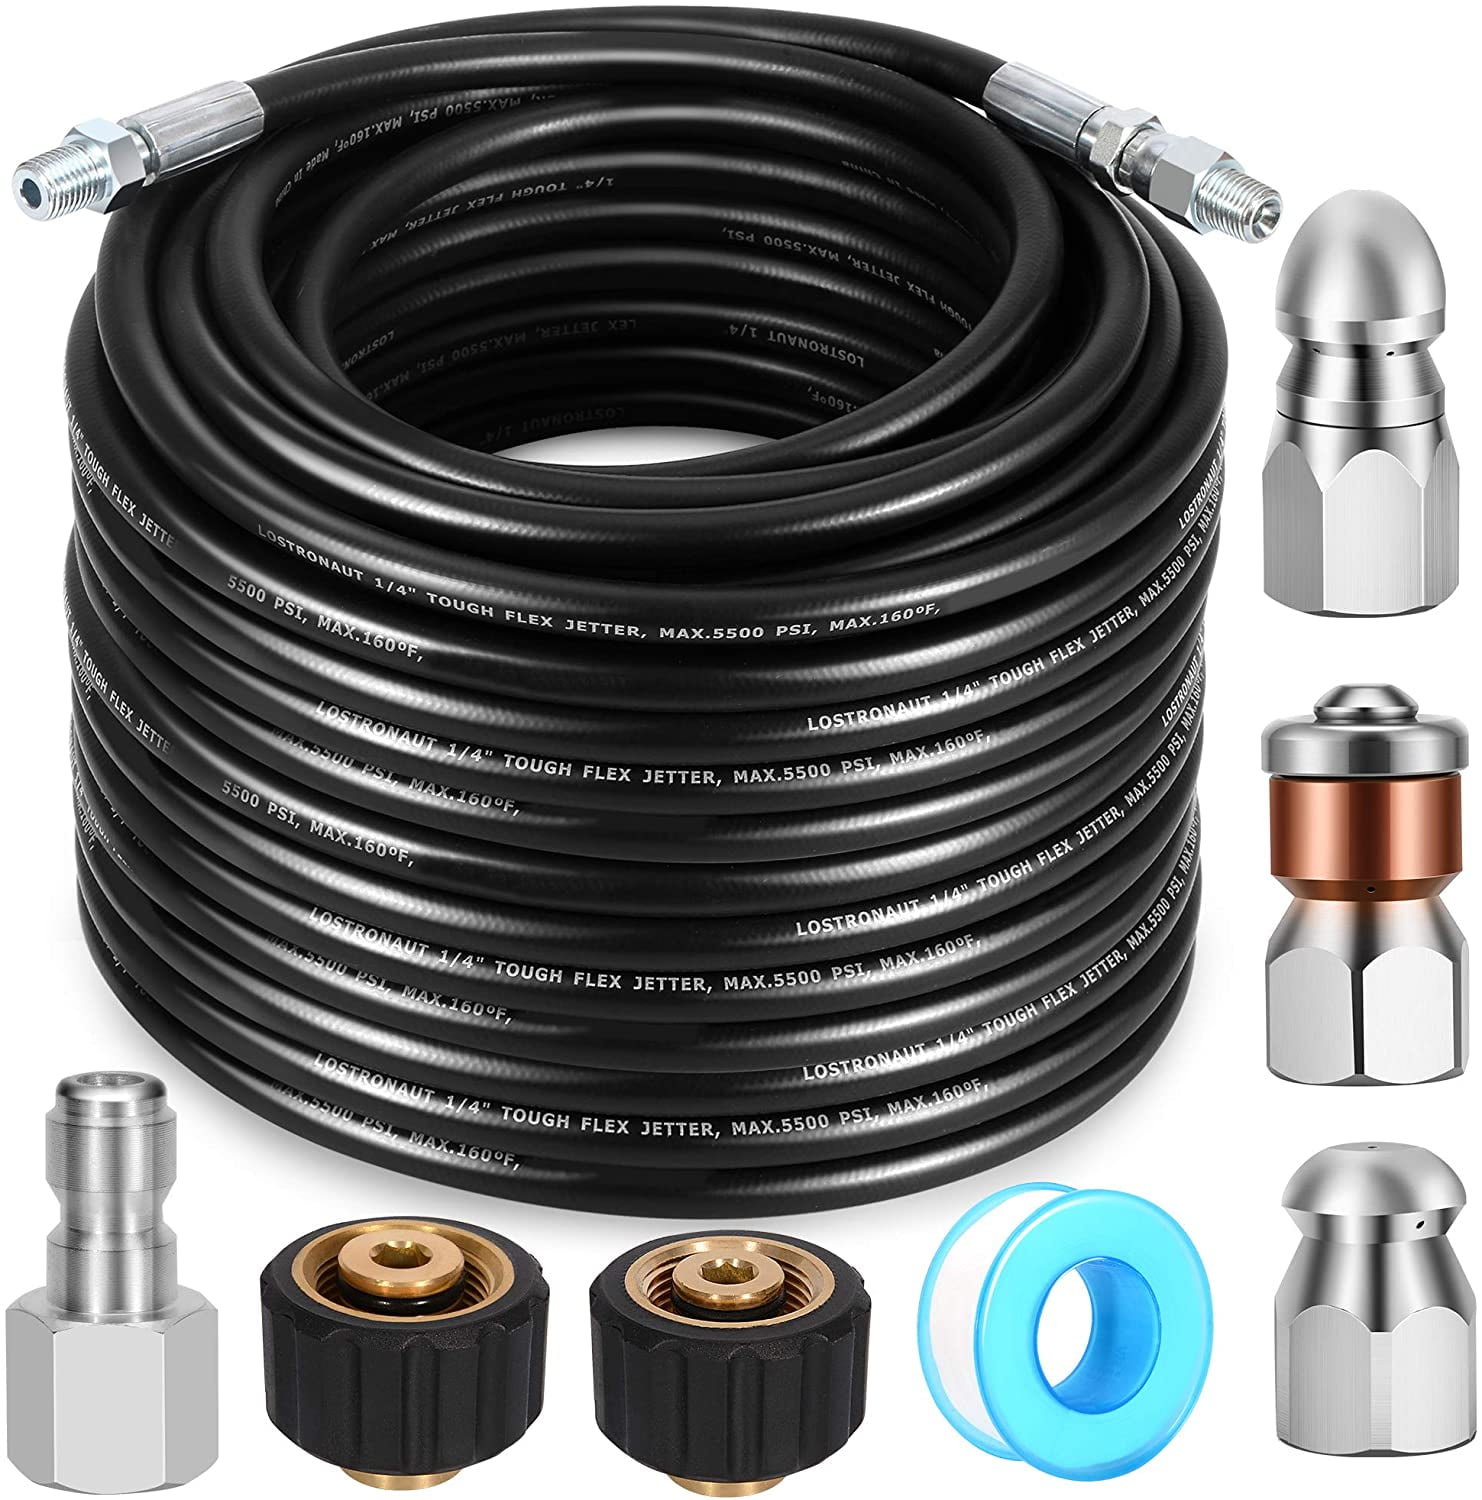 Drainx Pro 35-FT Steel Drum Auger Plumbing SnakeDrain Cleaning Cable with 